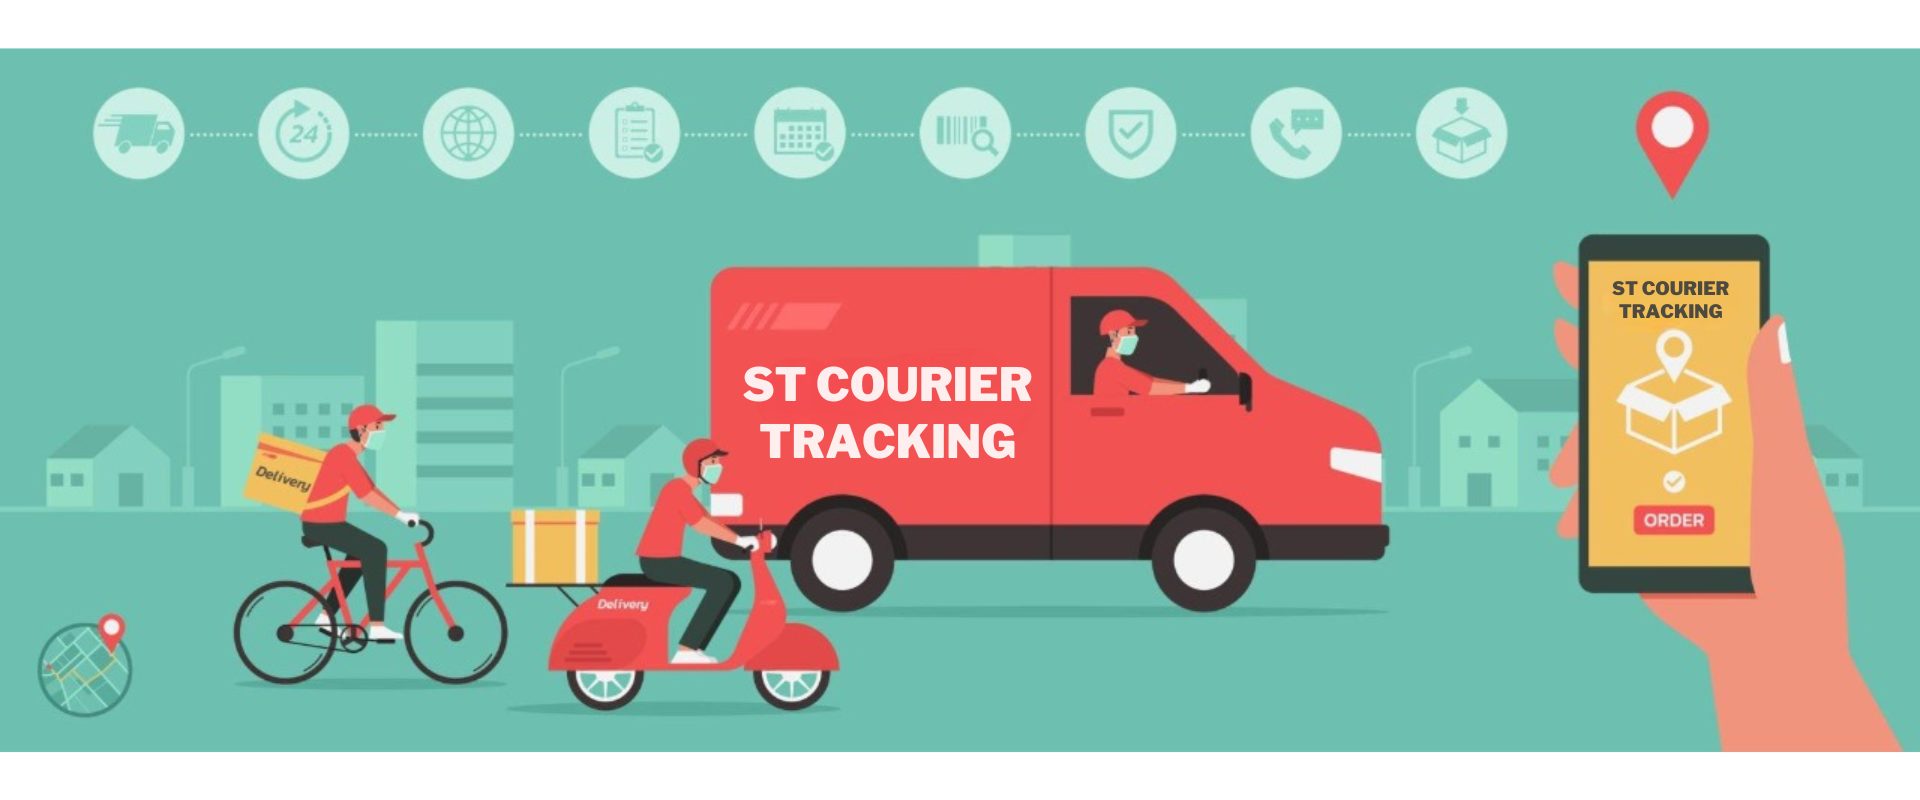 ST COURIER TRACKING